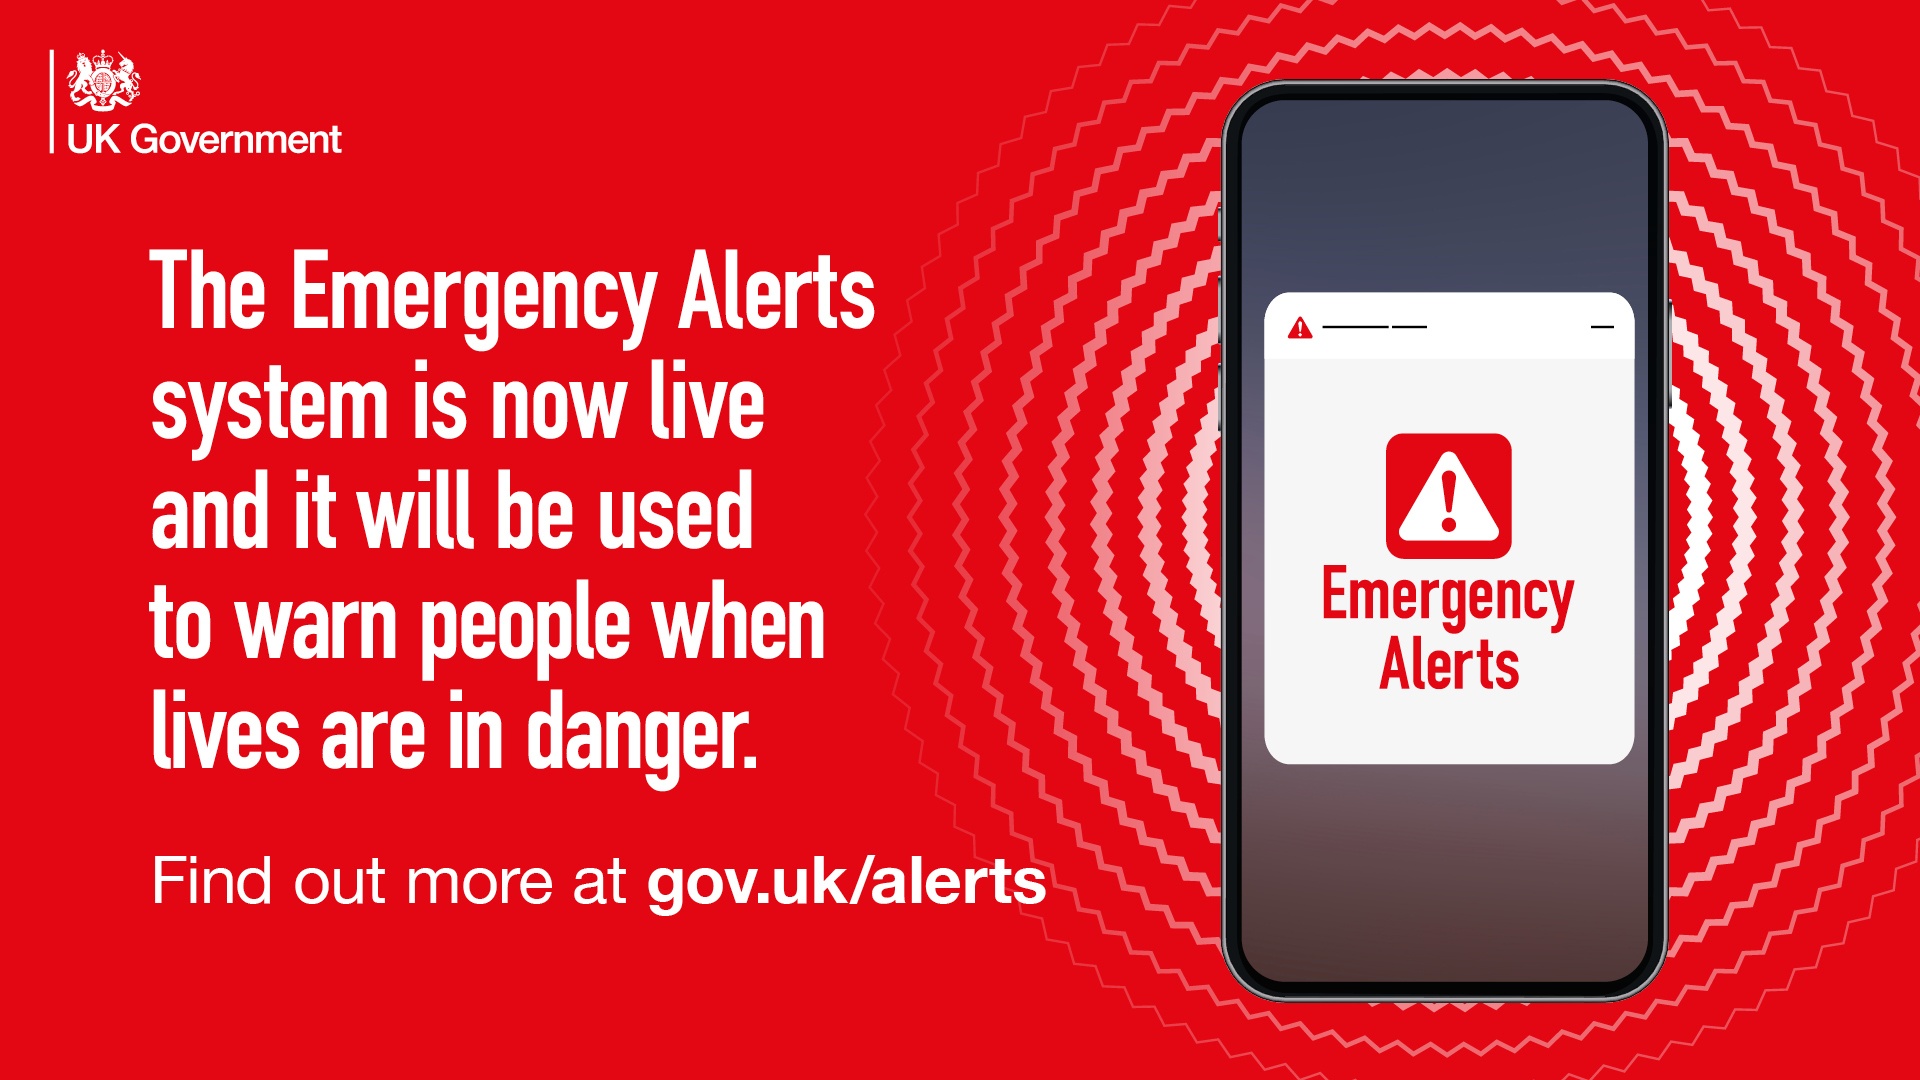 Sunday's alert is a test, but future emergency alerts will be used to inform people about severe threats to life in particular areas, such as flooding or wildfires.